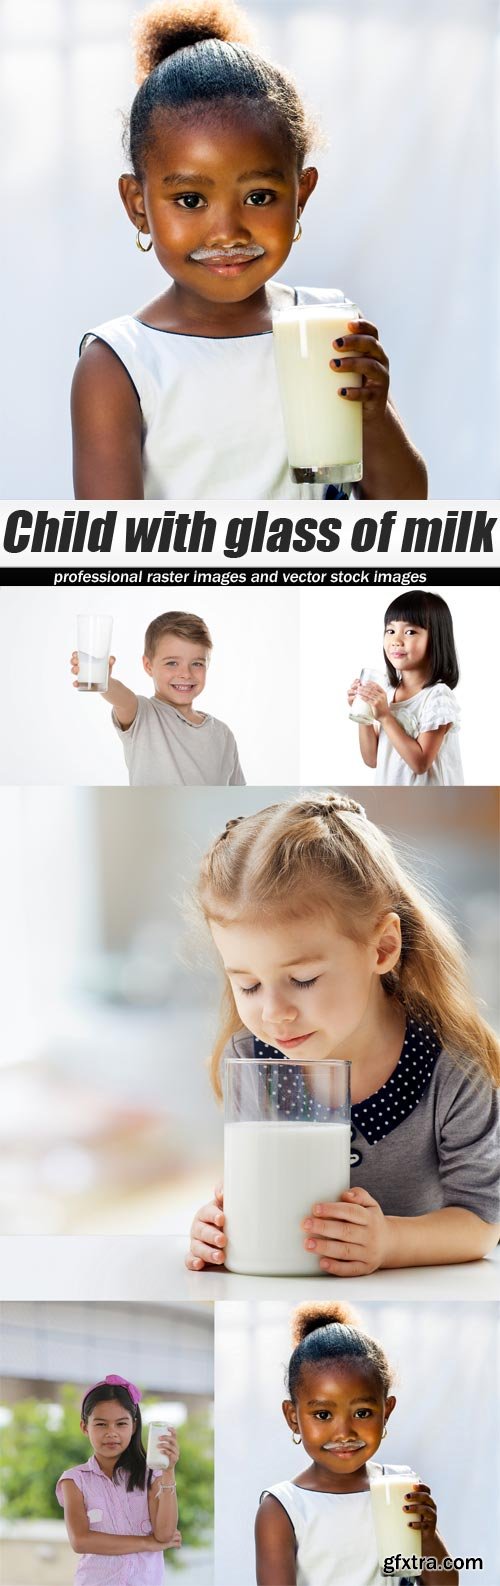 Child with glass of milk